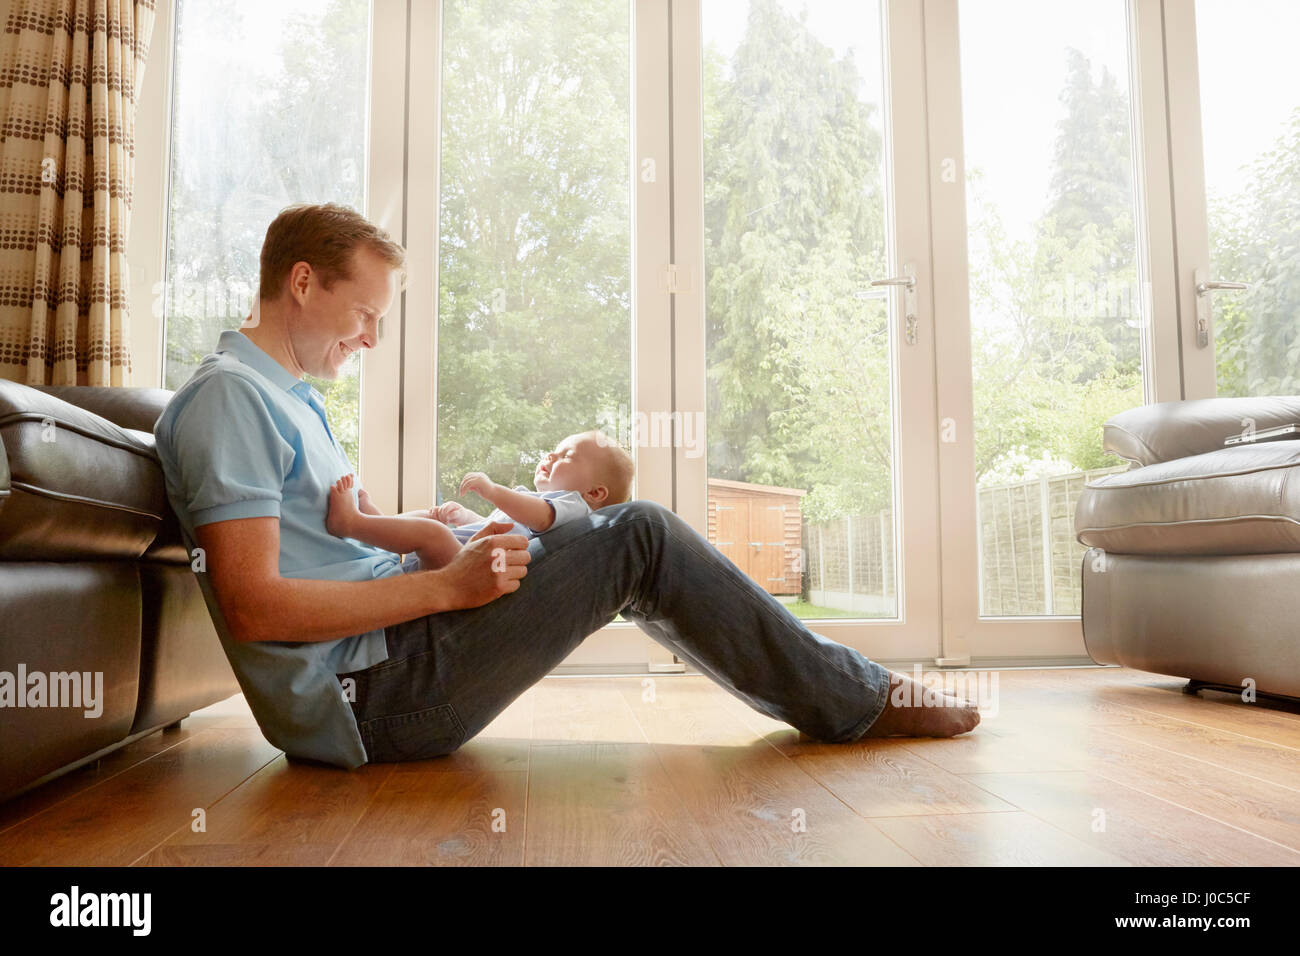 Mature man sitting on floor with baby son on his lap Stock Photo